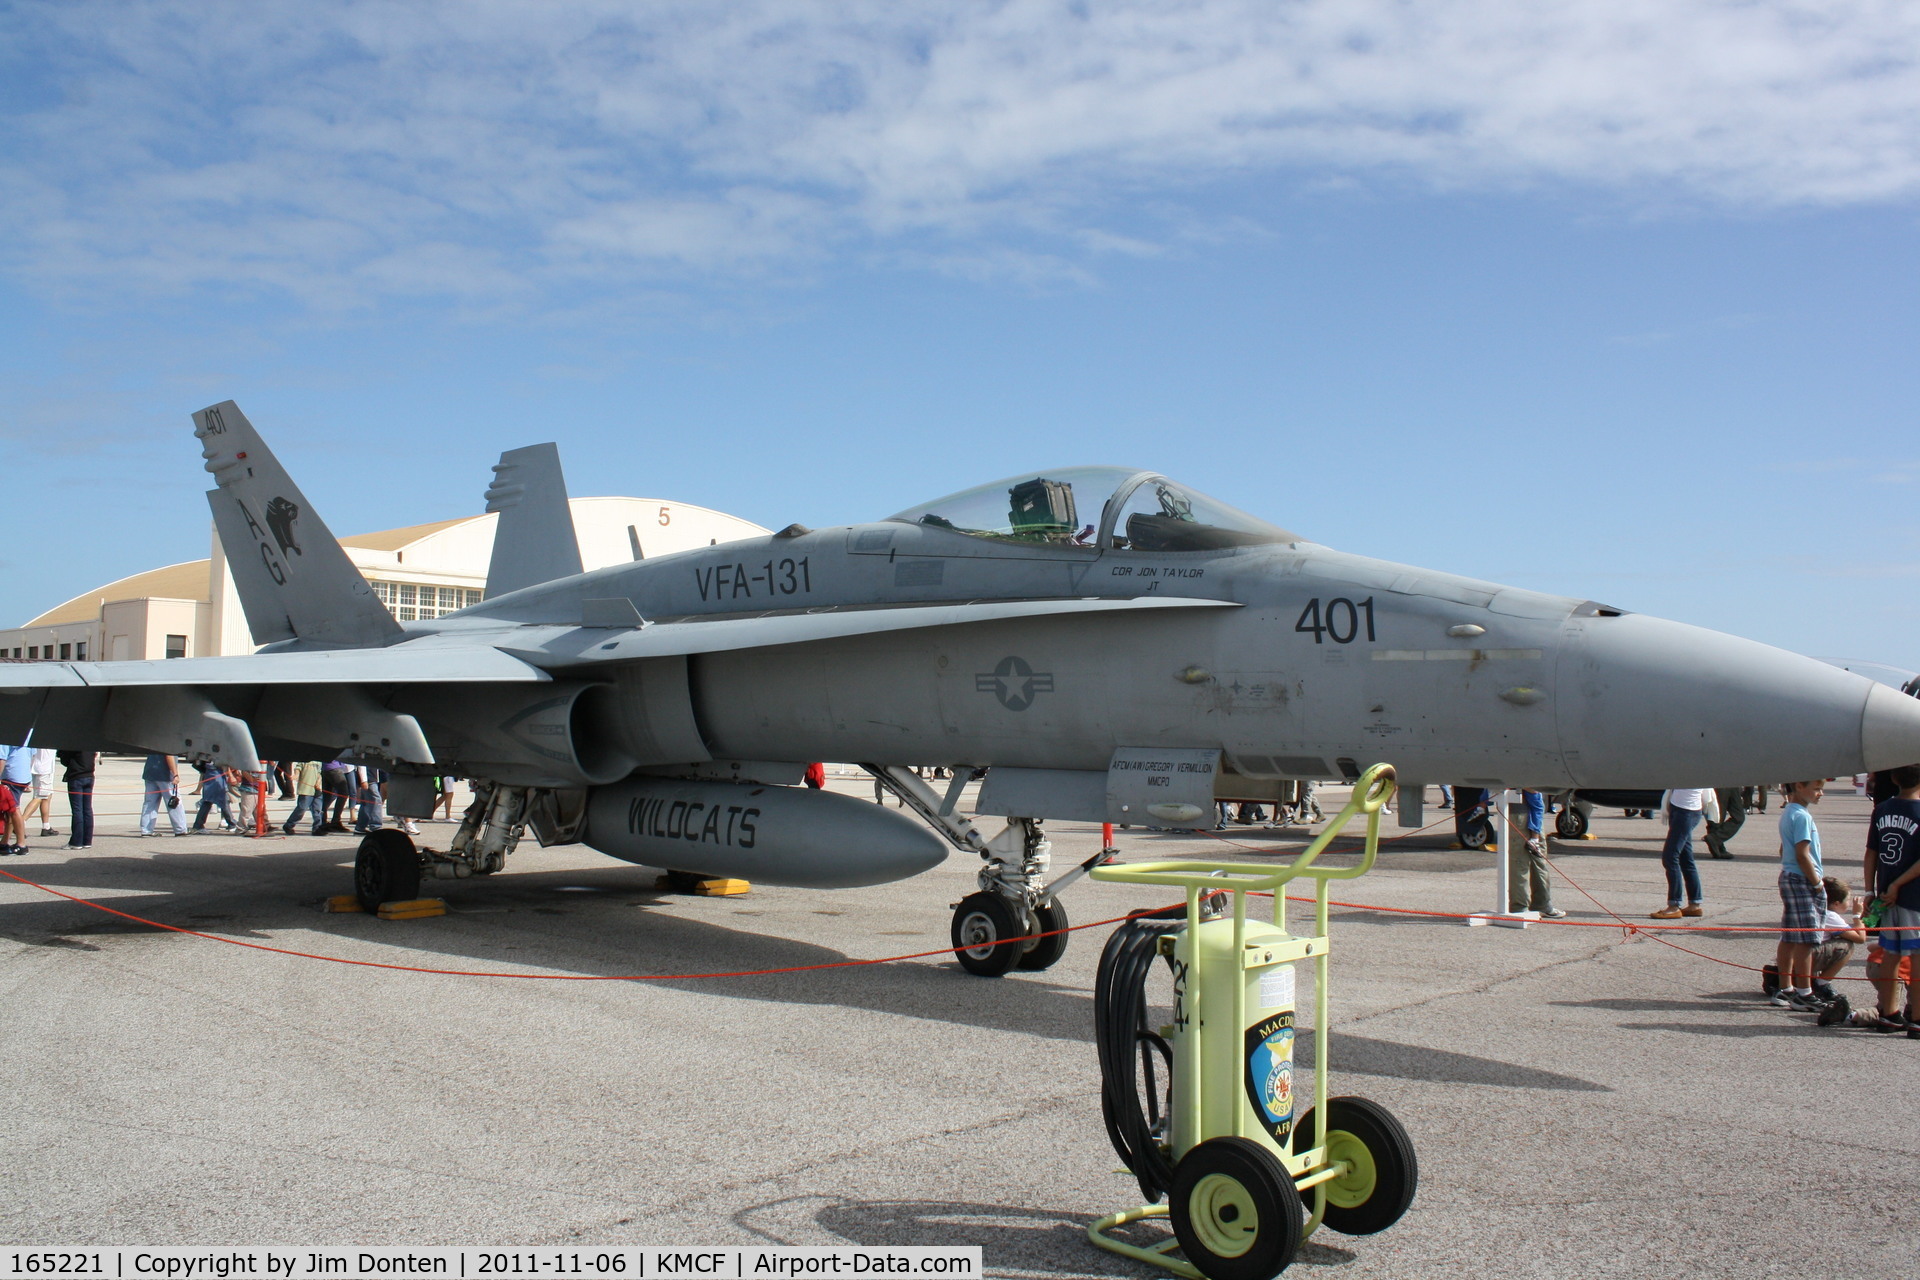 165221, McDonnell Douglas F/A-18C Hornet C/N 1404/C446, An F-18 Hornet from the Strike Fighter Squadron 131 at Naval Station Oceana sits on static display at MacDill Air Fest